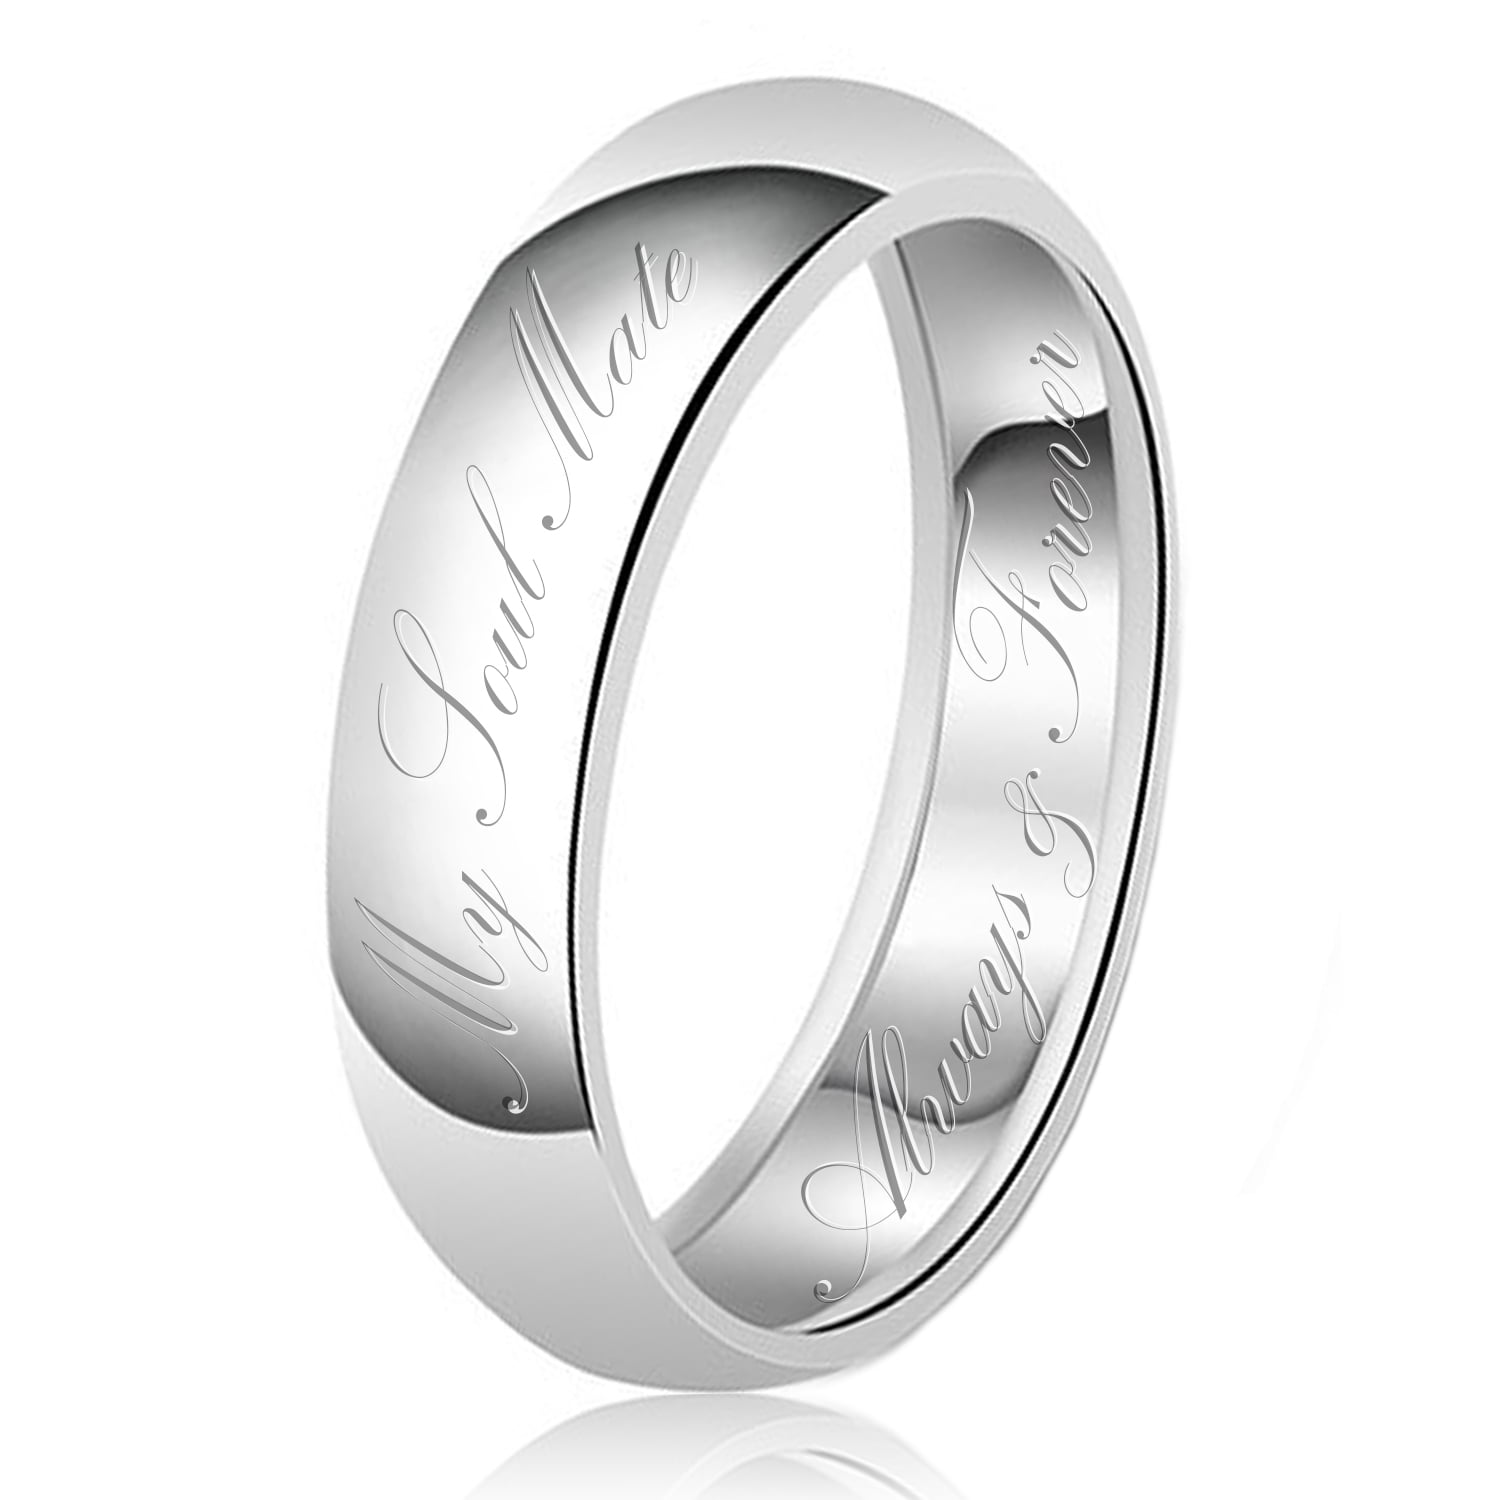 Ginger Lyne Collection Glow in The Dark Stainless Steel Comfort Fit Wedding Band Ring